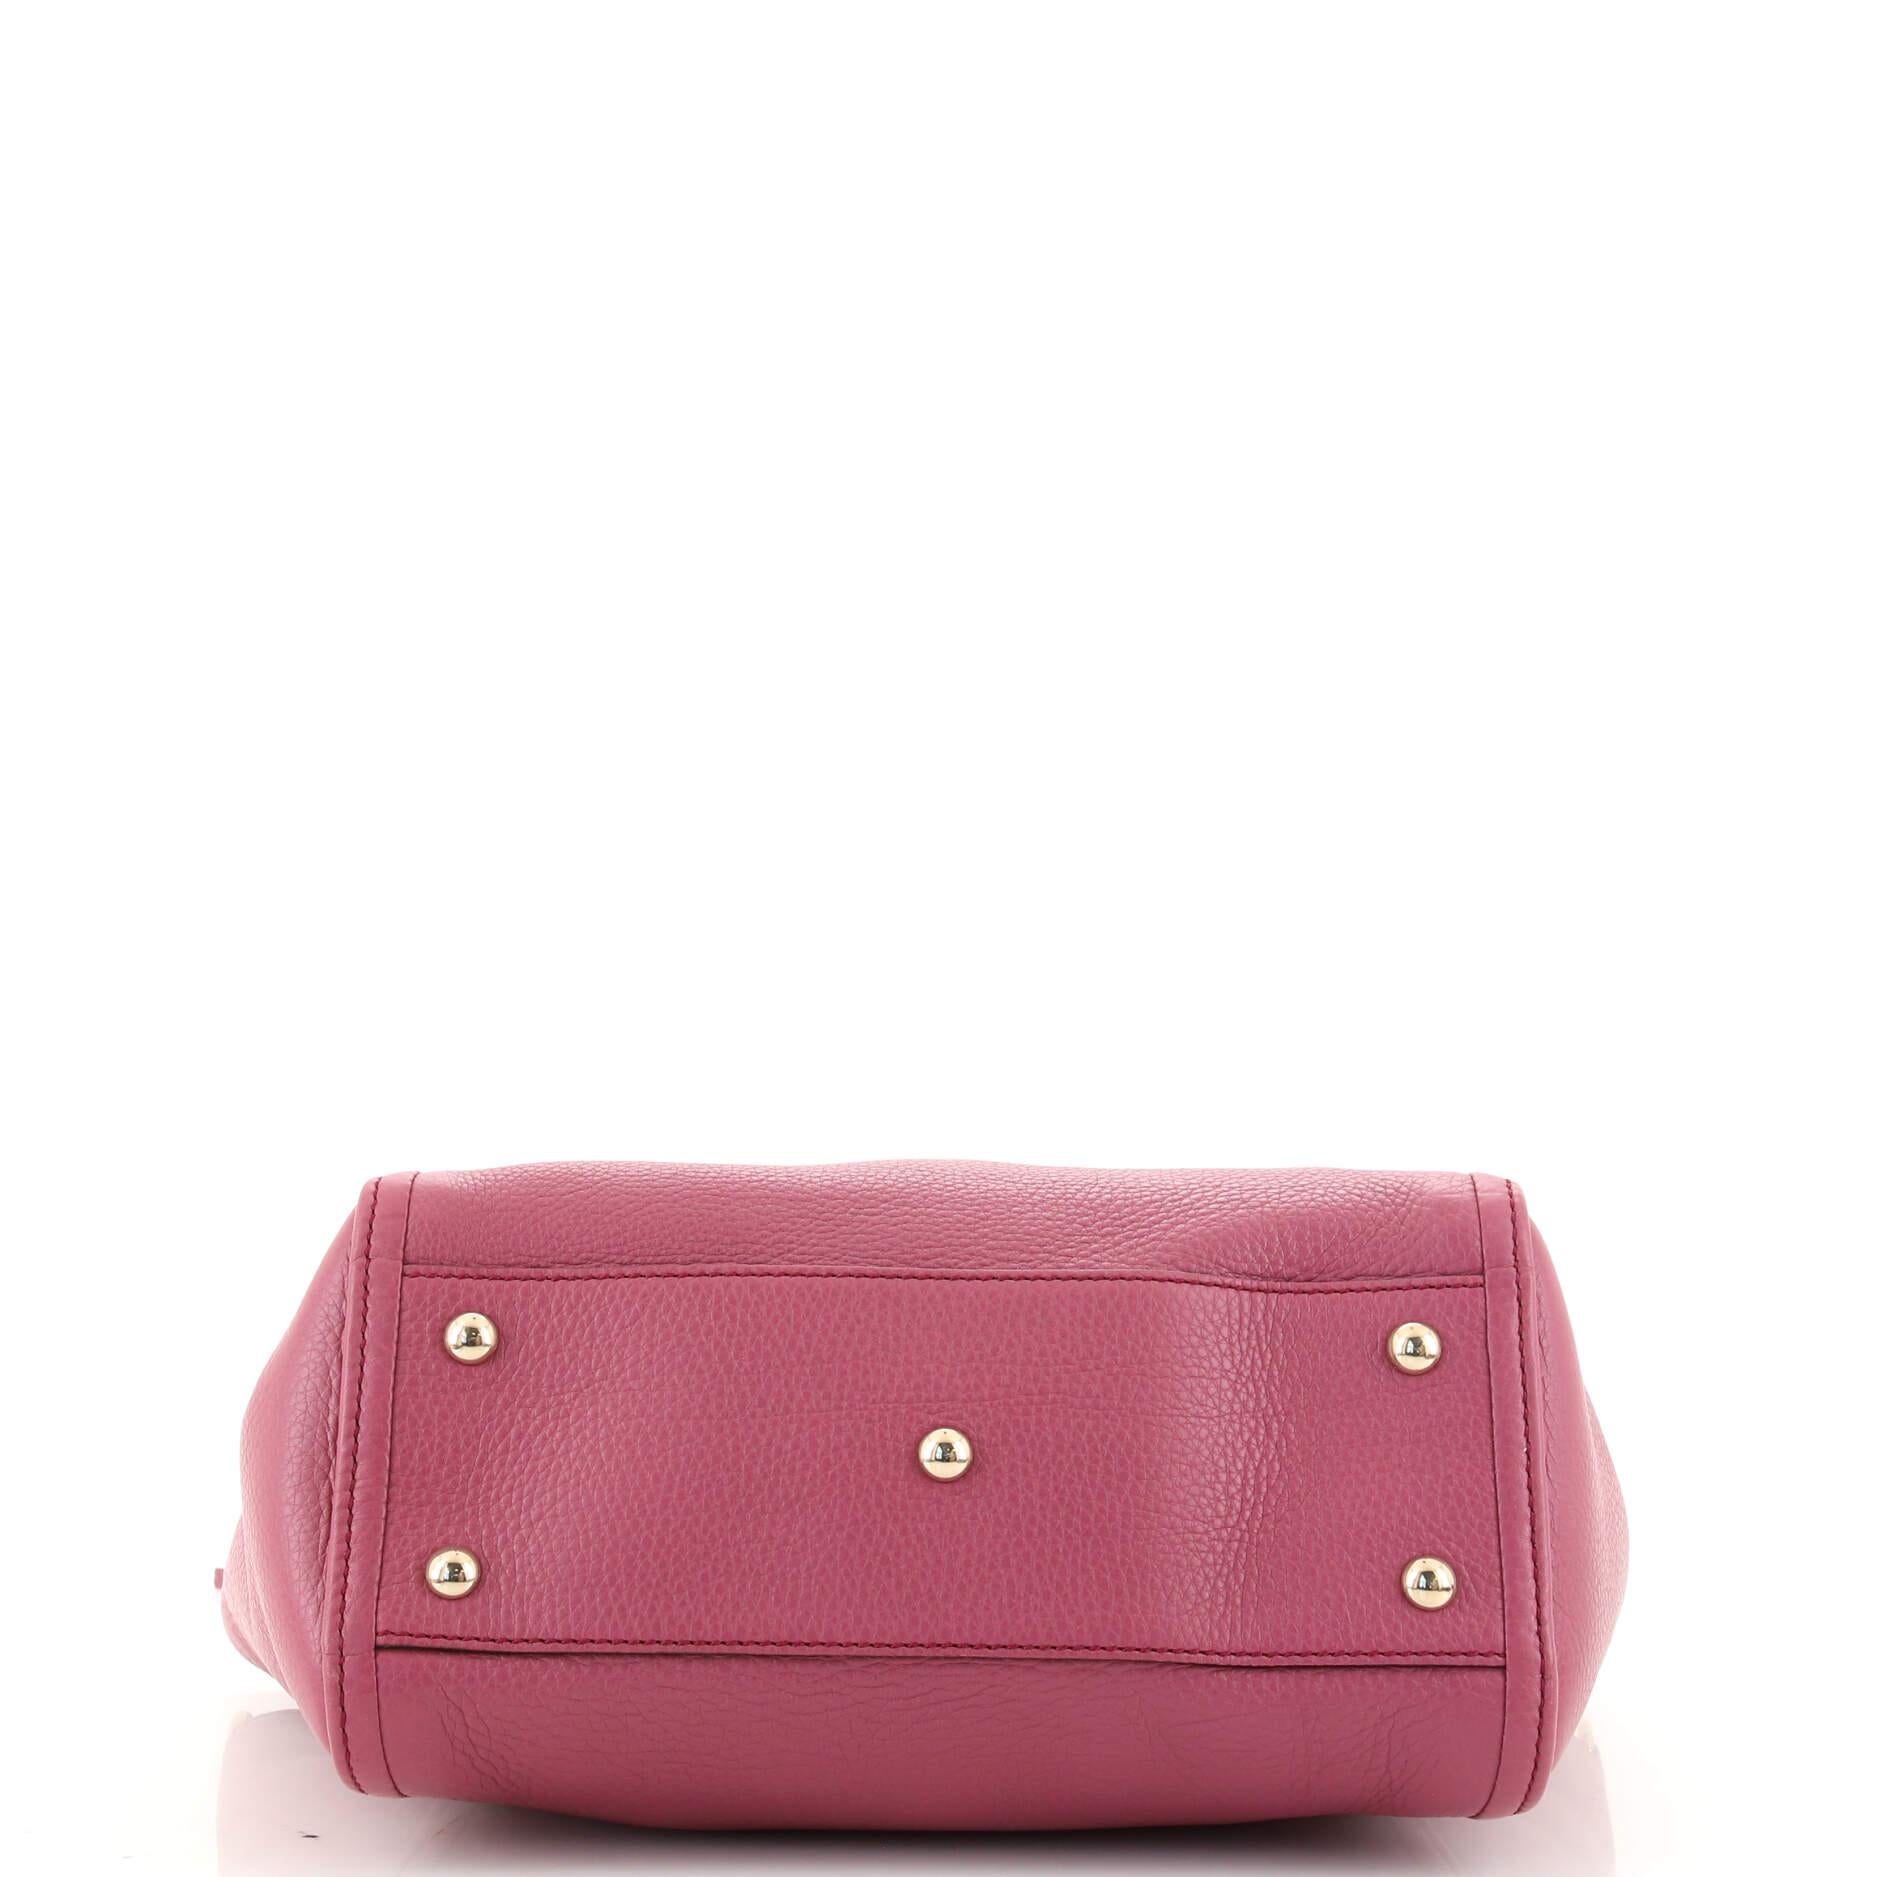 Pink Gucci Soho Convertible Top Handle Bag Leather Small